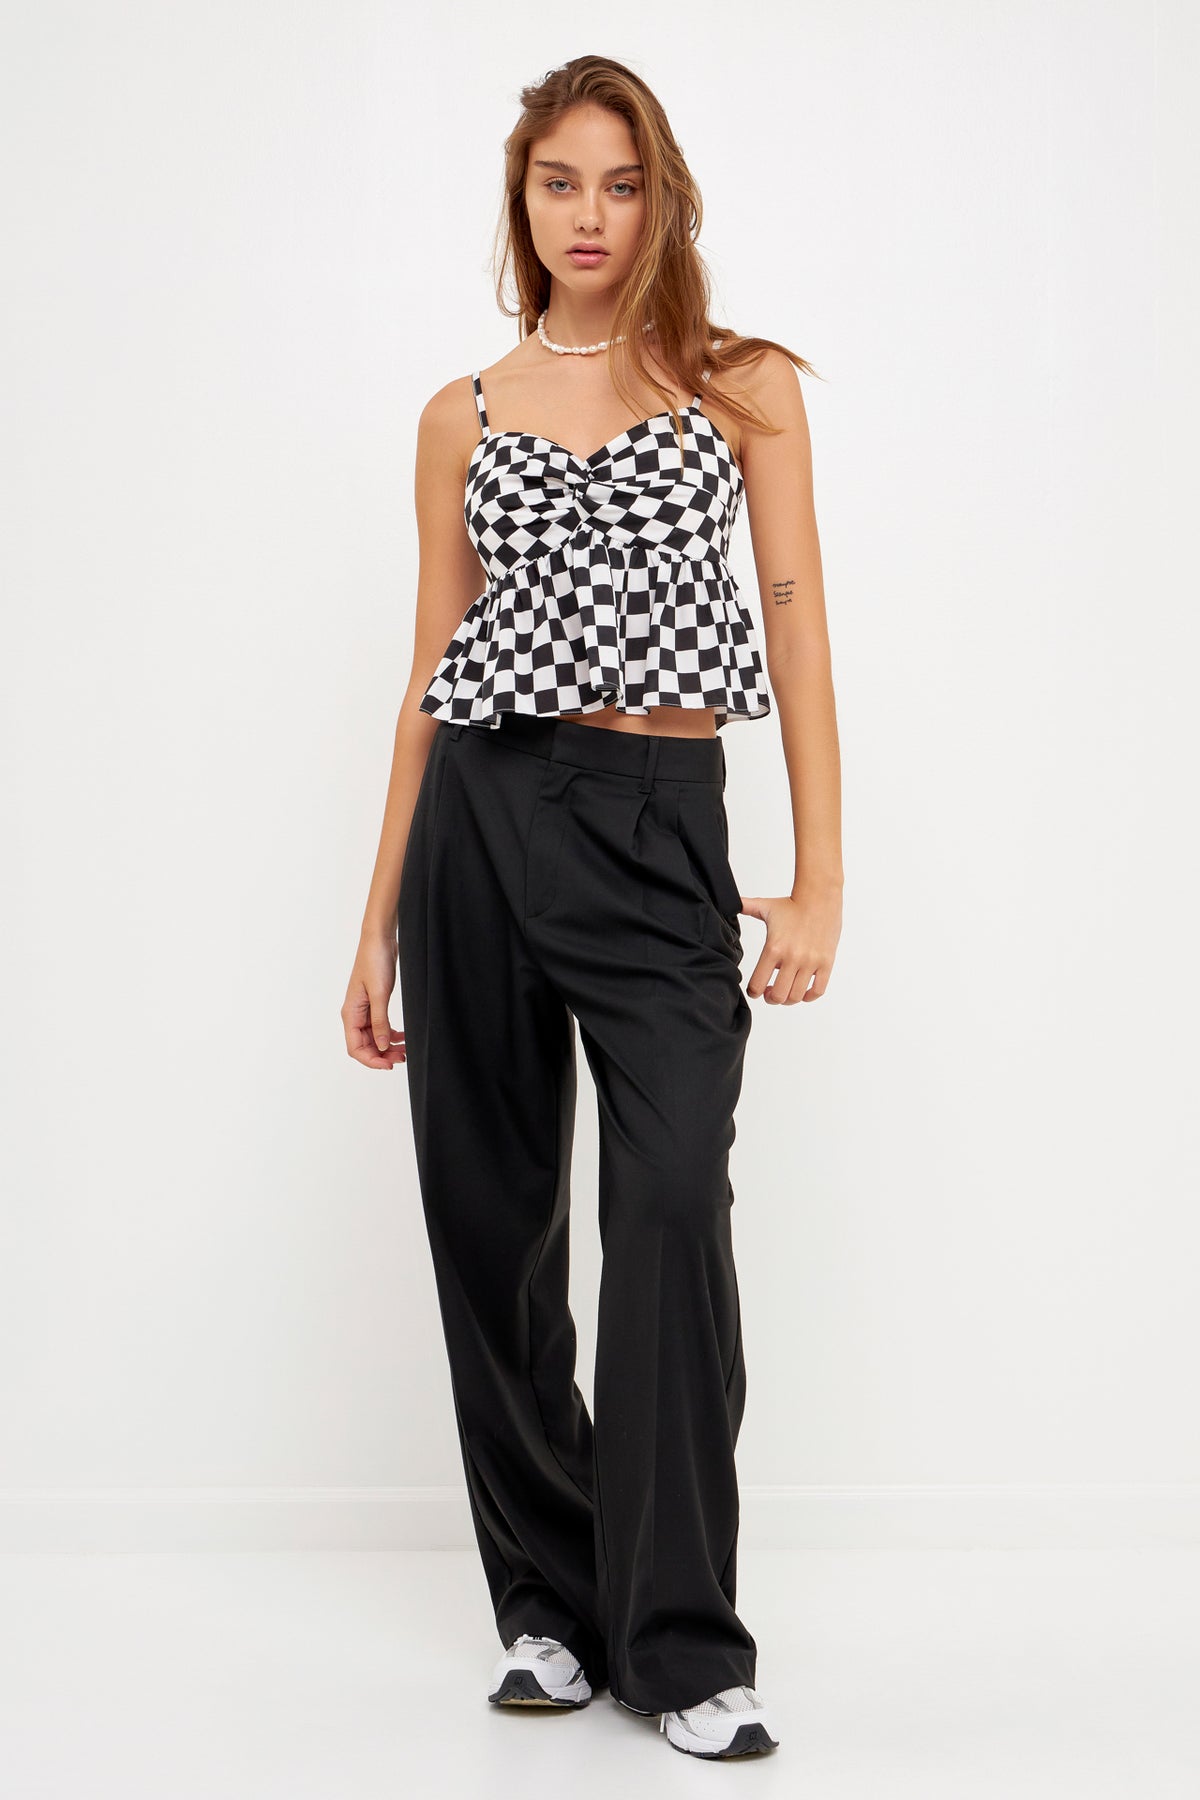 GREY LAB - Knotted Checker Print Top - TOPS available at Objectrare